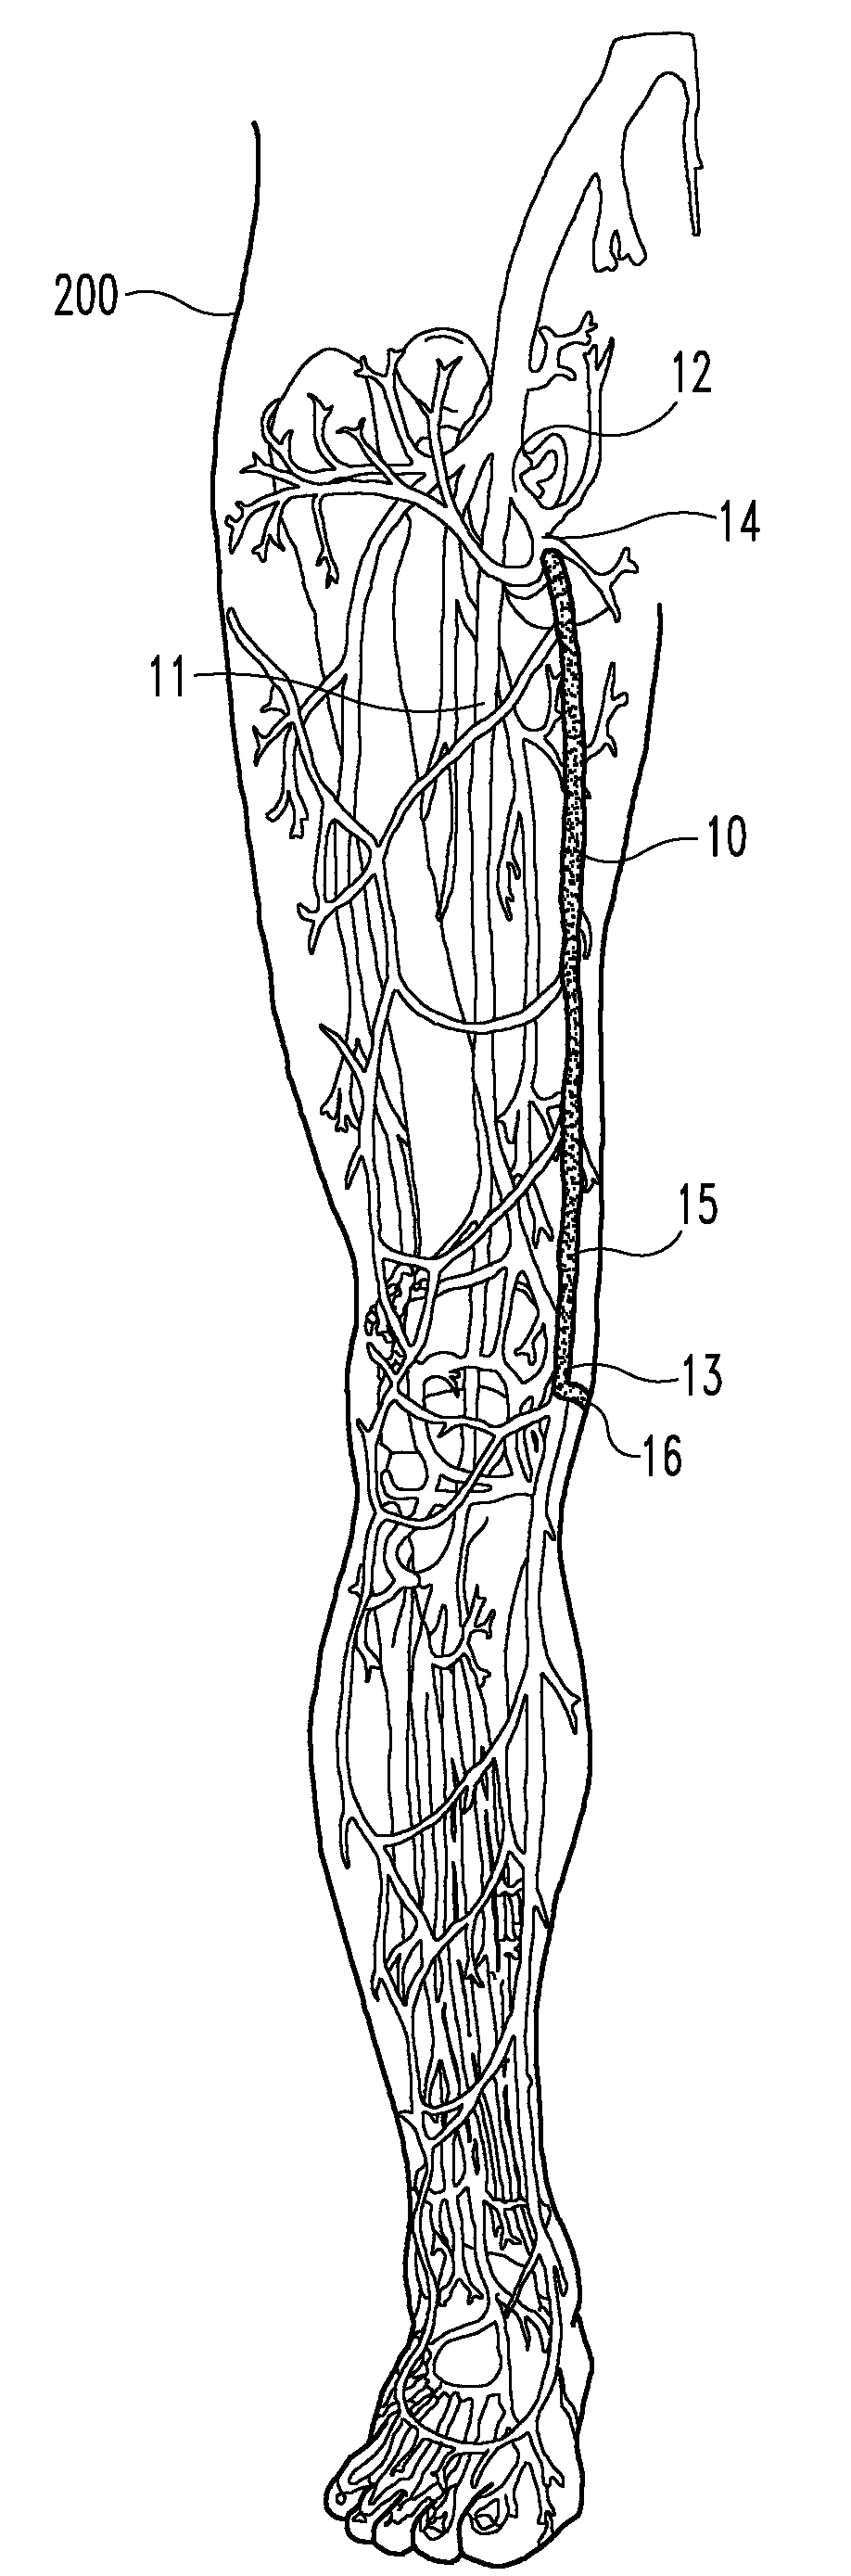 Enhanced remodelable materials for occluding bodily vessels and related methods and systems